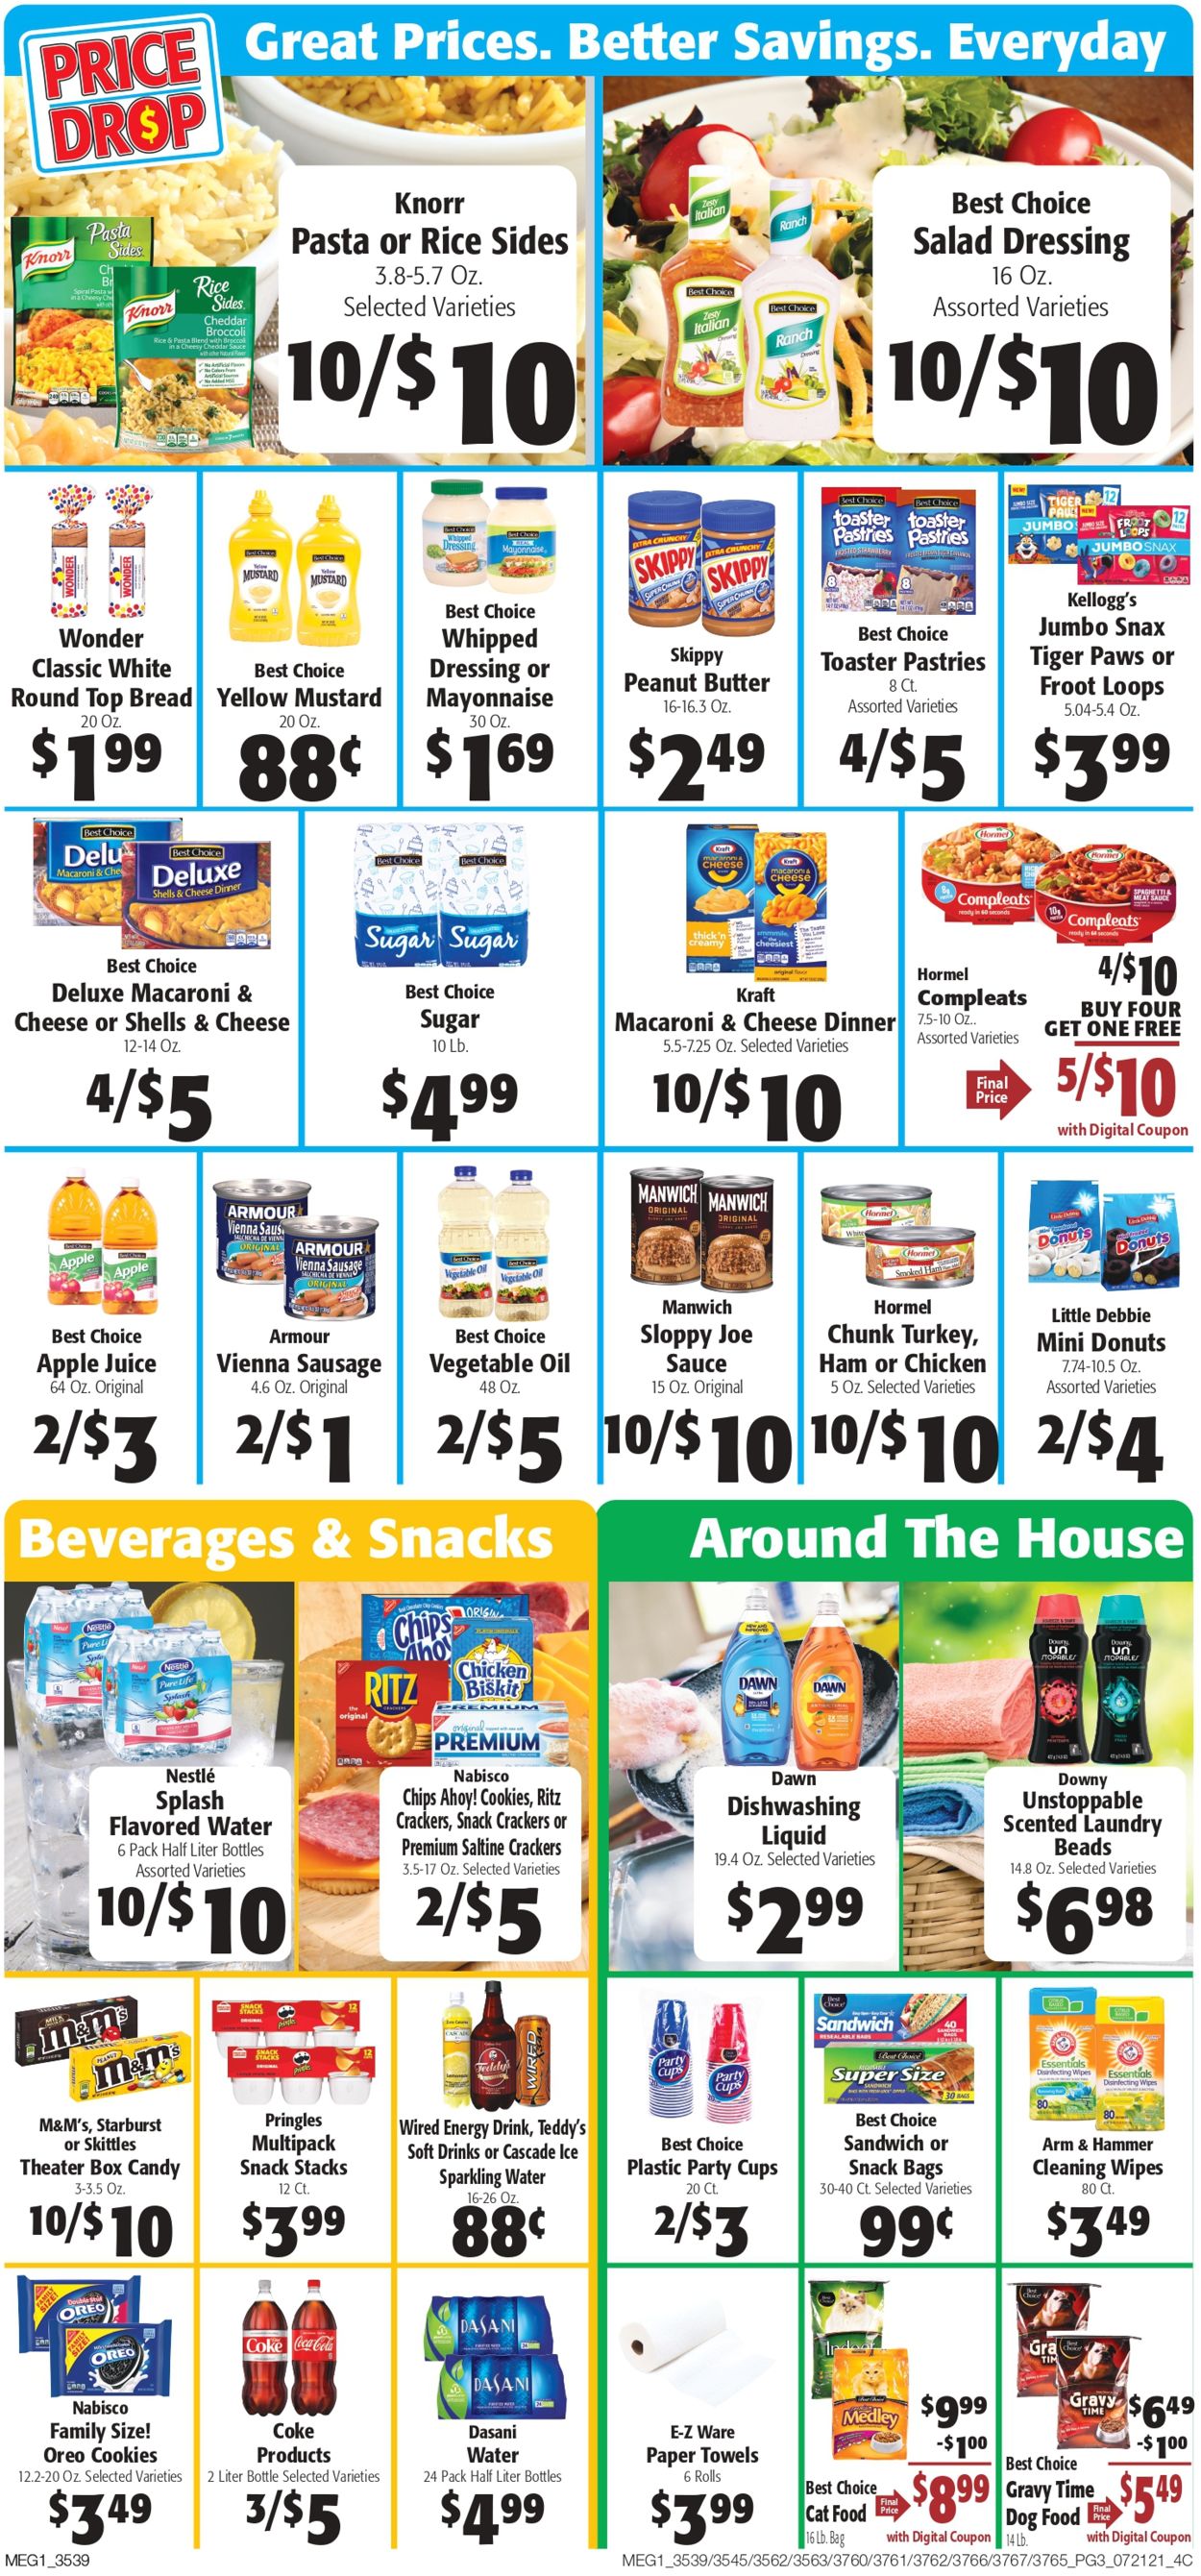 Hays Supermarket Current weekly ad 07/21 - 07/27/2021 [3] - frequent ...